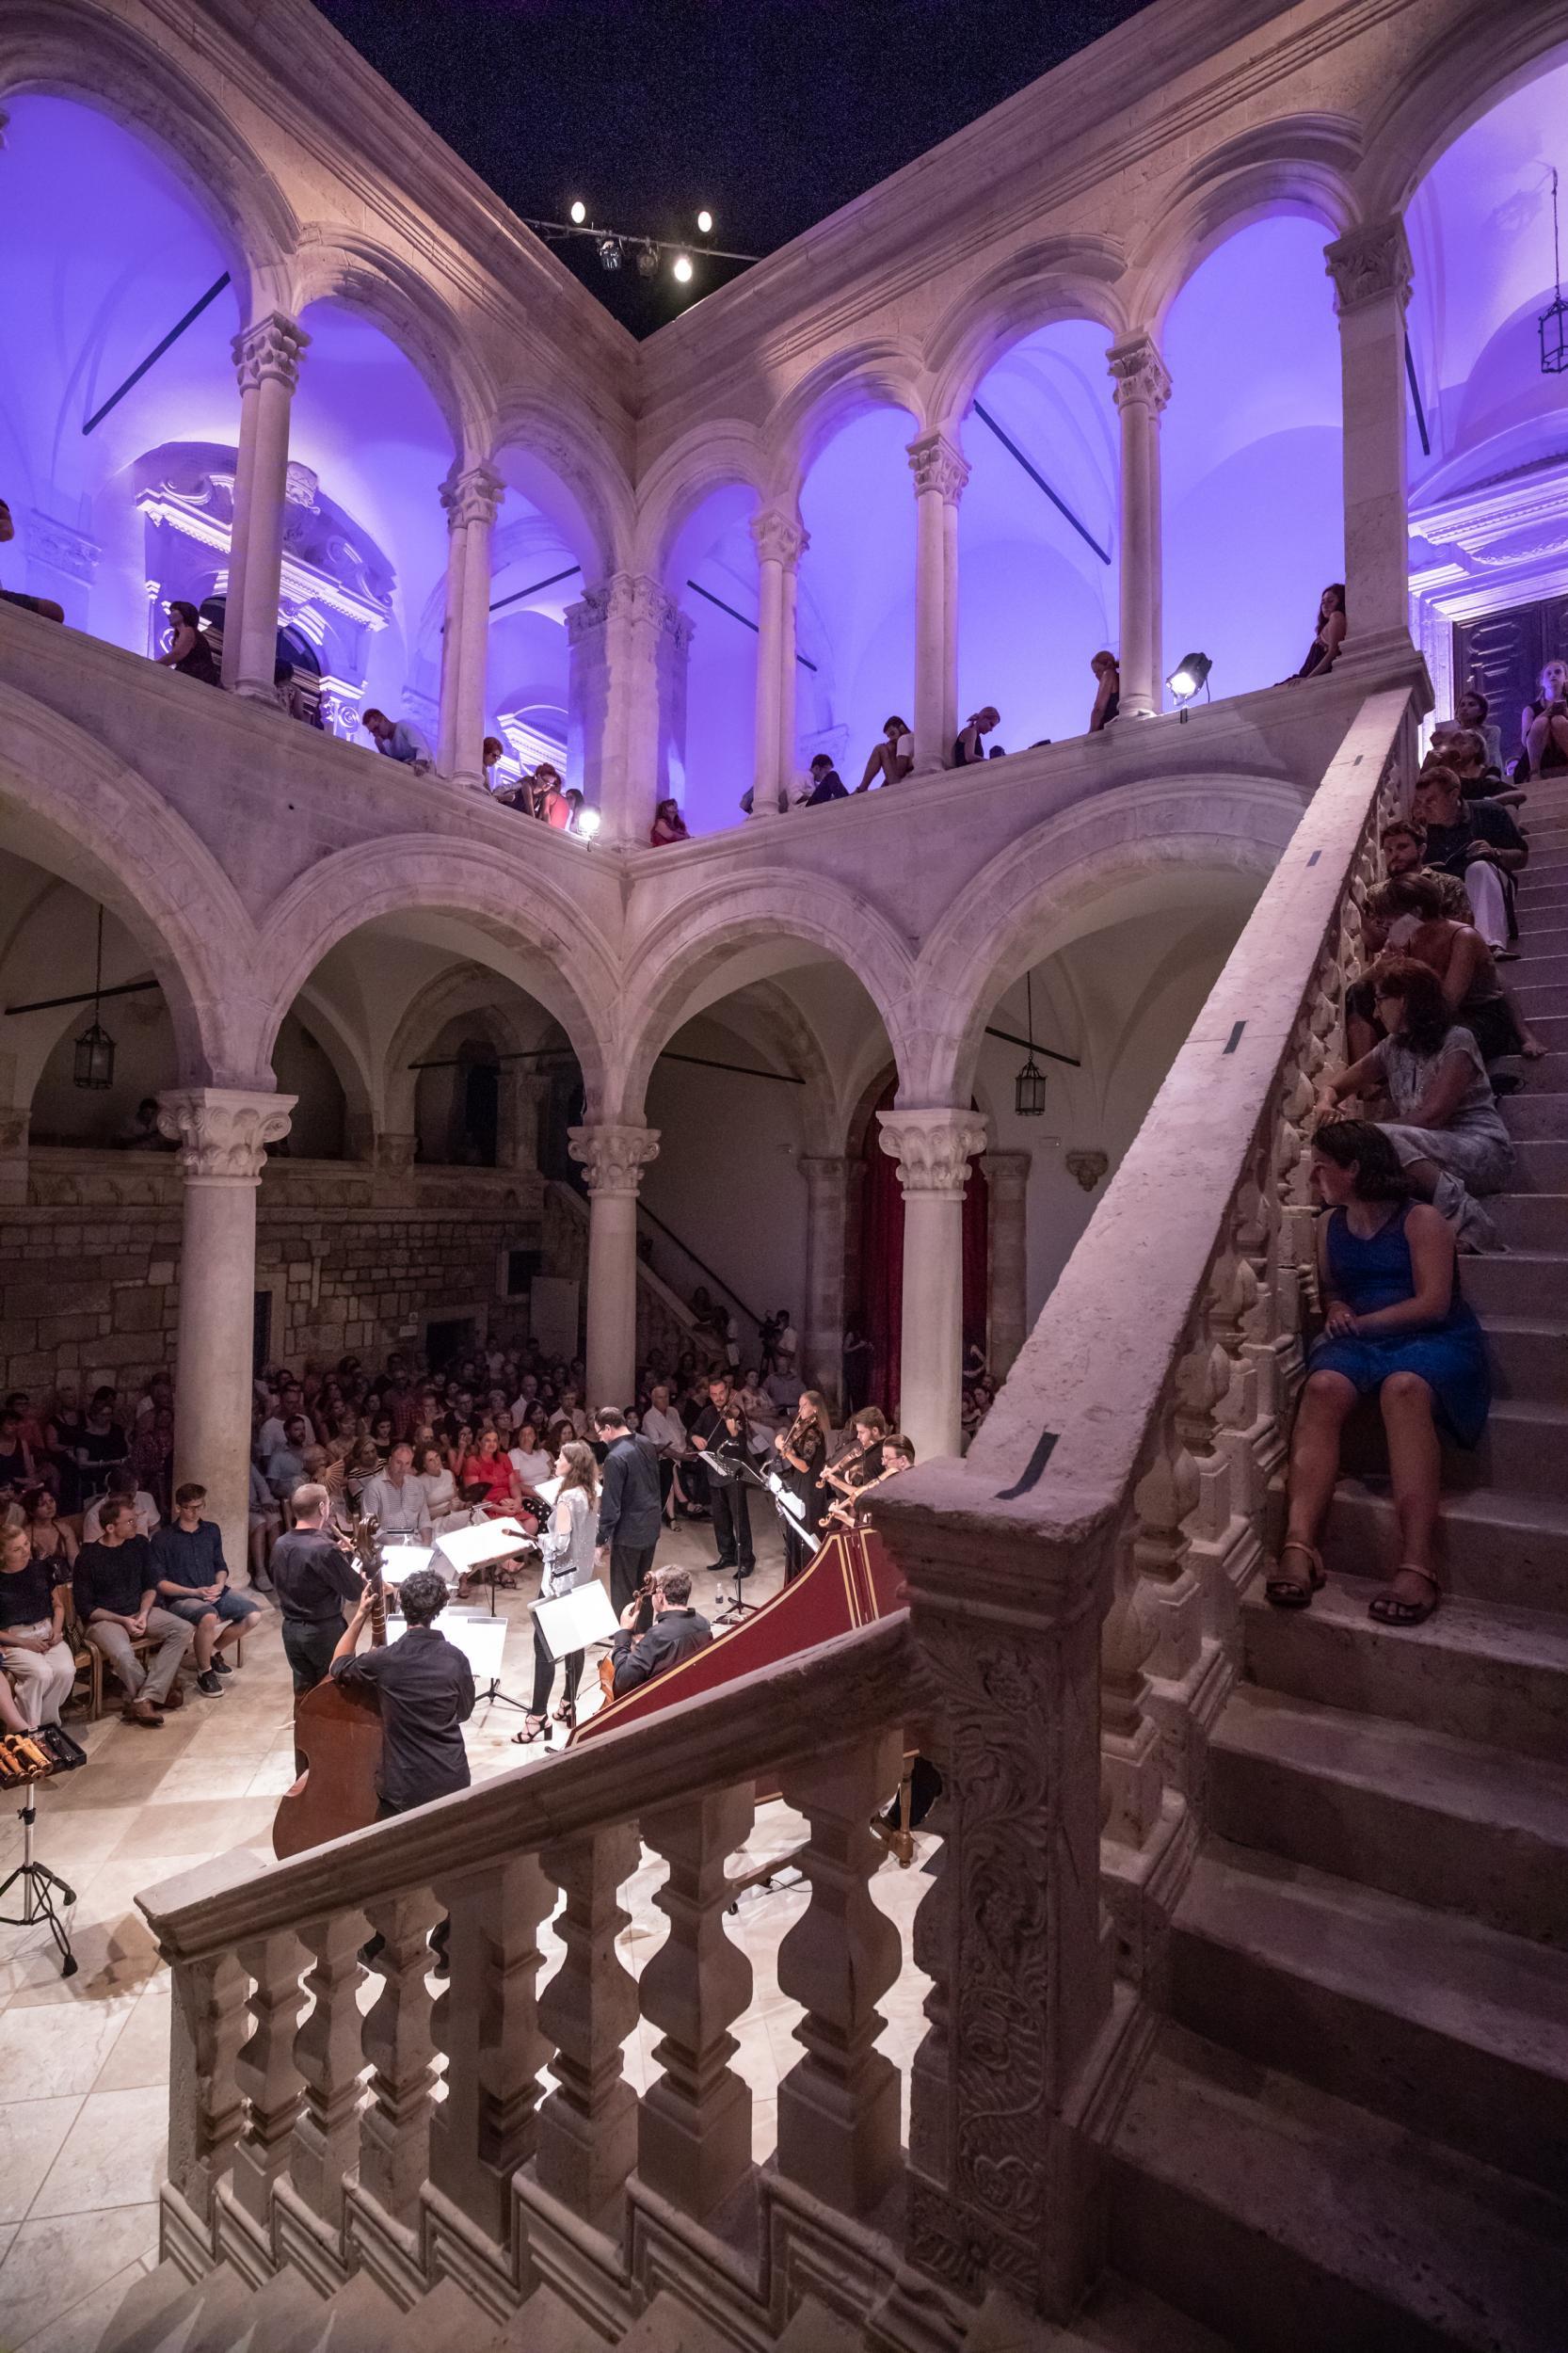 Countertenor Andreas Scholl in concert in the Rector’s Palace Atrium